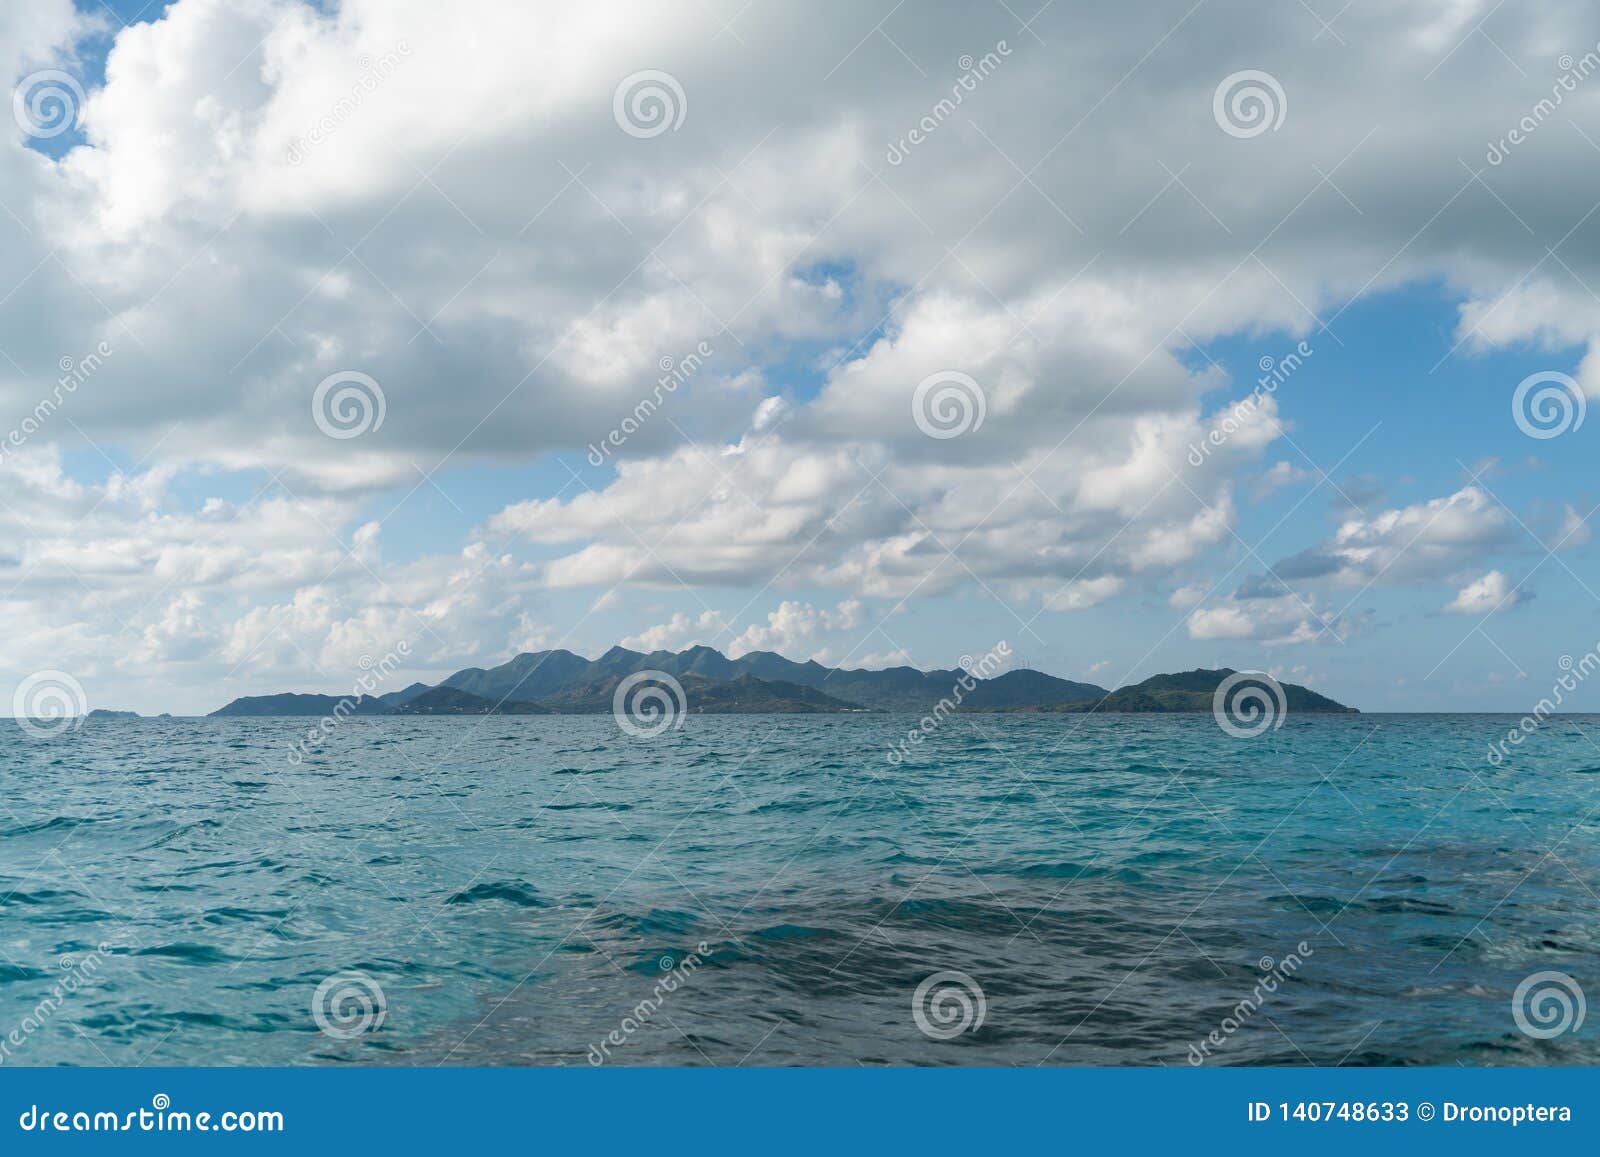 Providencia Island Seen With Cloudy Blue Sky And Blue Water Stock Image Image Of Travel